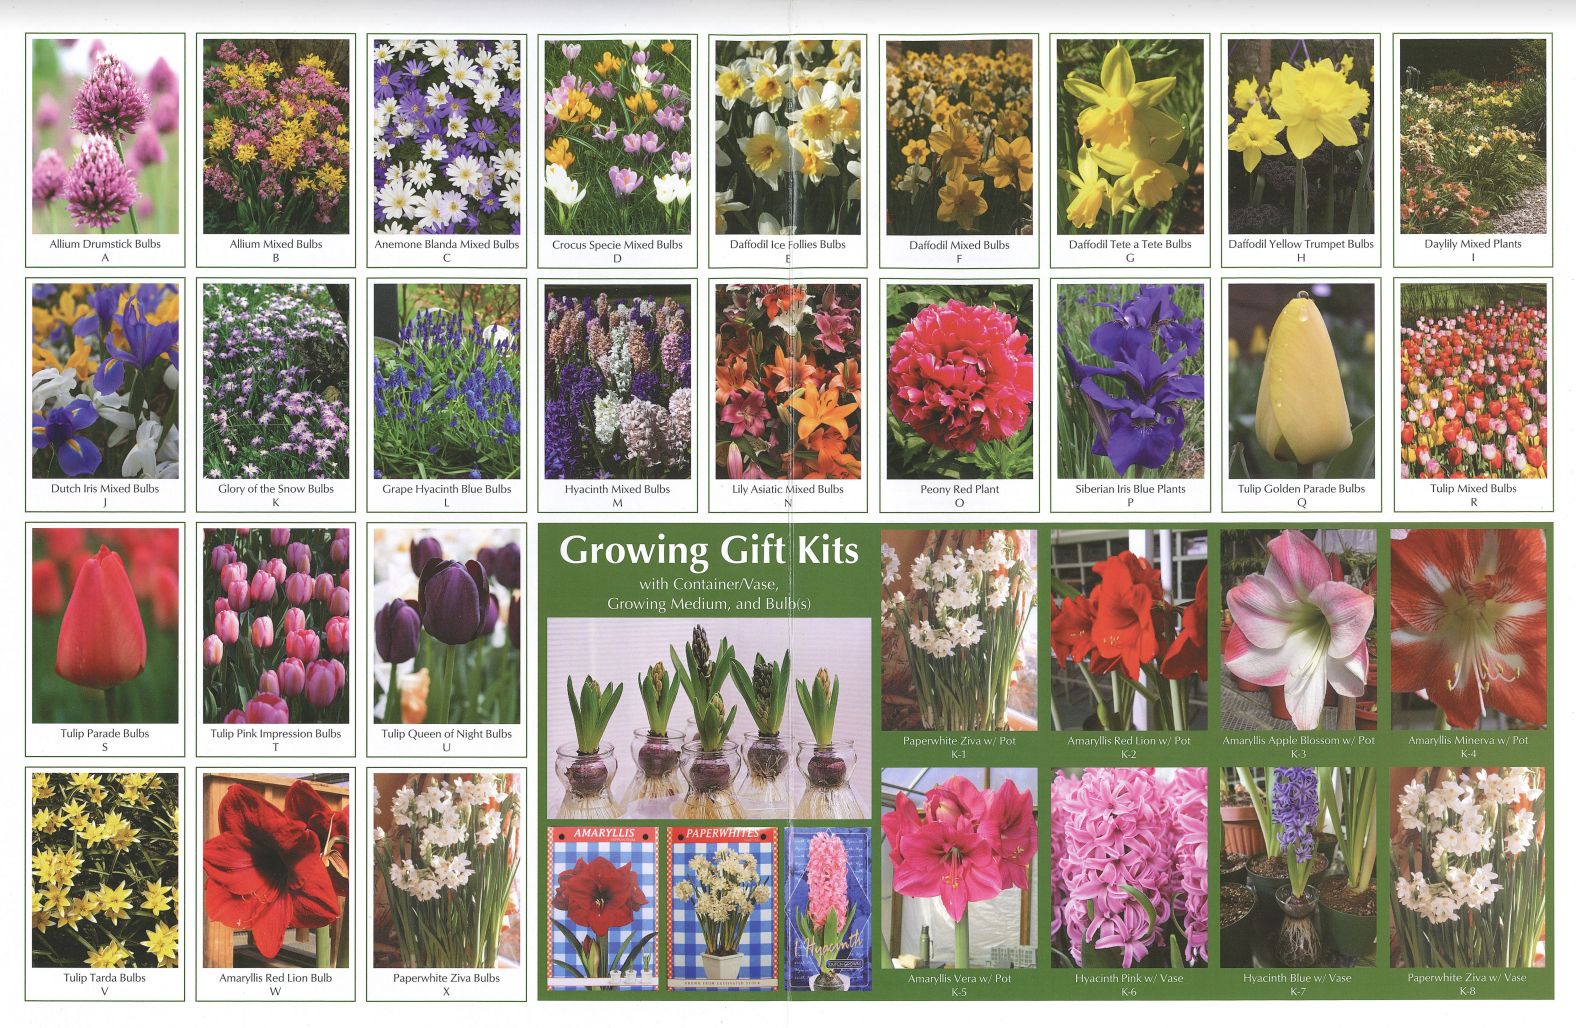 A growing gifts kits poster with a plethora of images of various flowers.